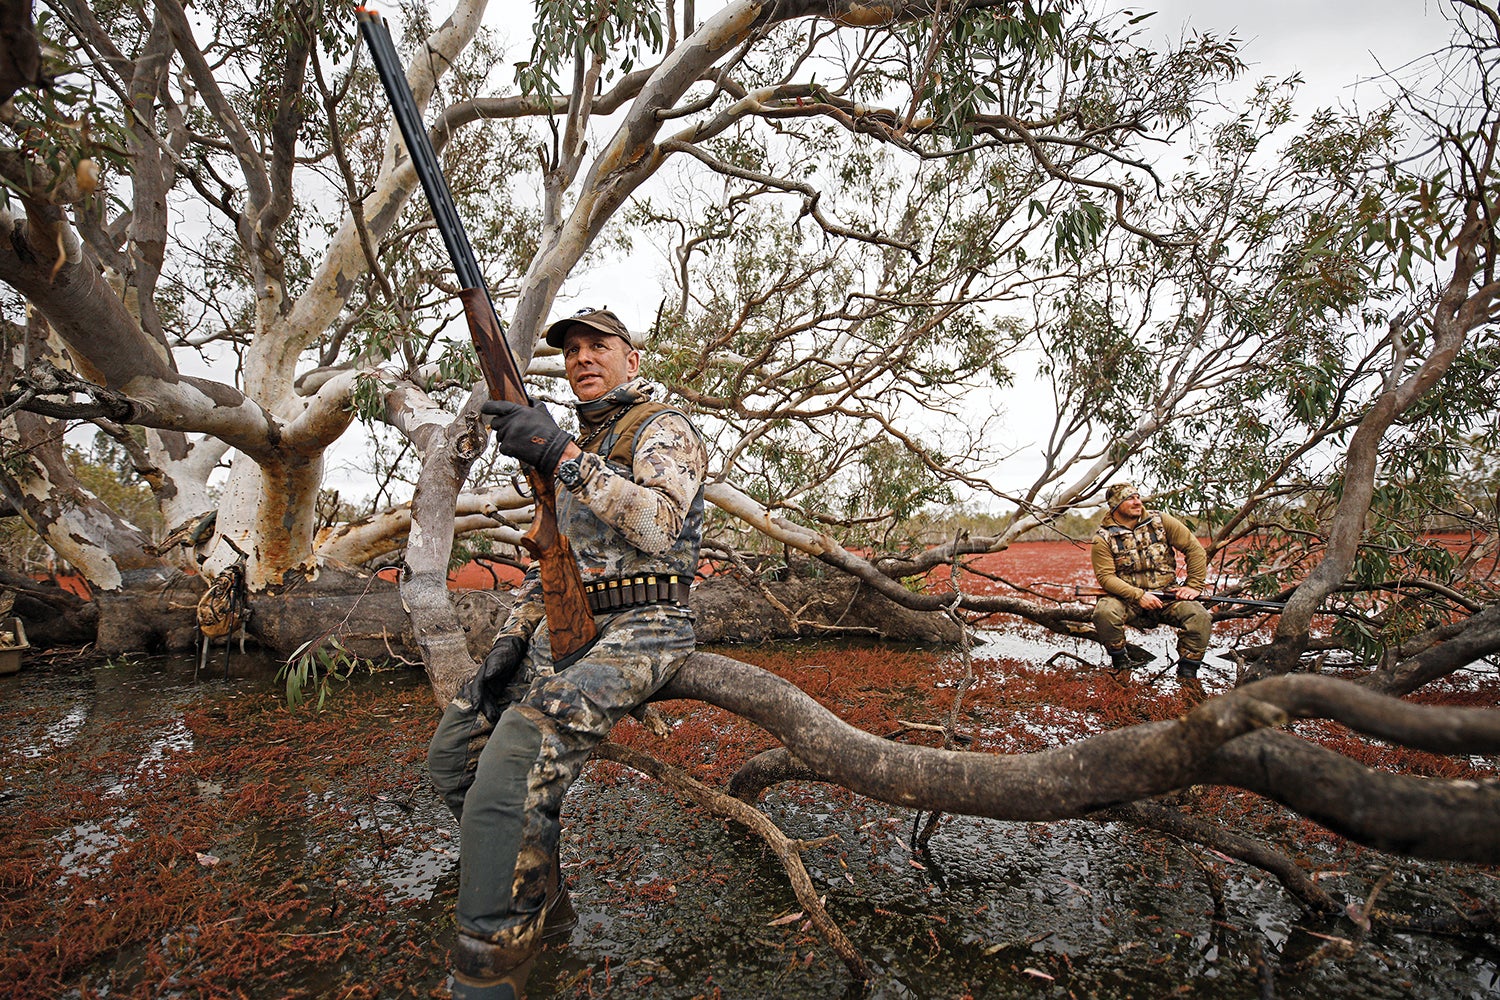 two duck hunters sit on branches of sprawling red-gum eucalyptus tree